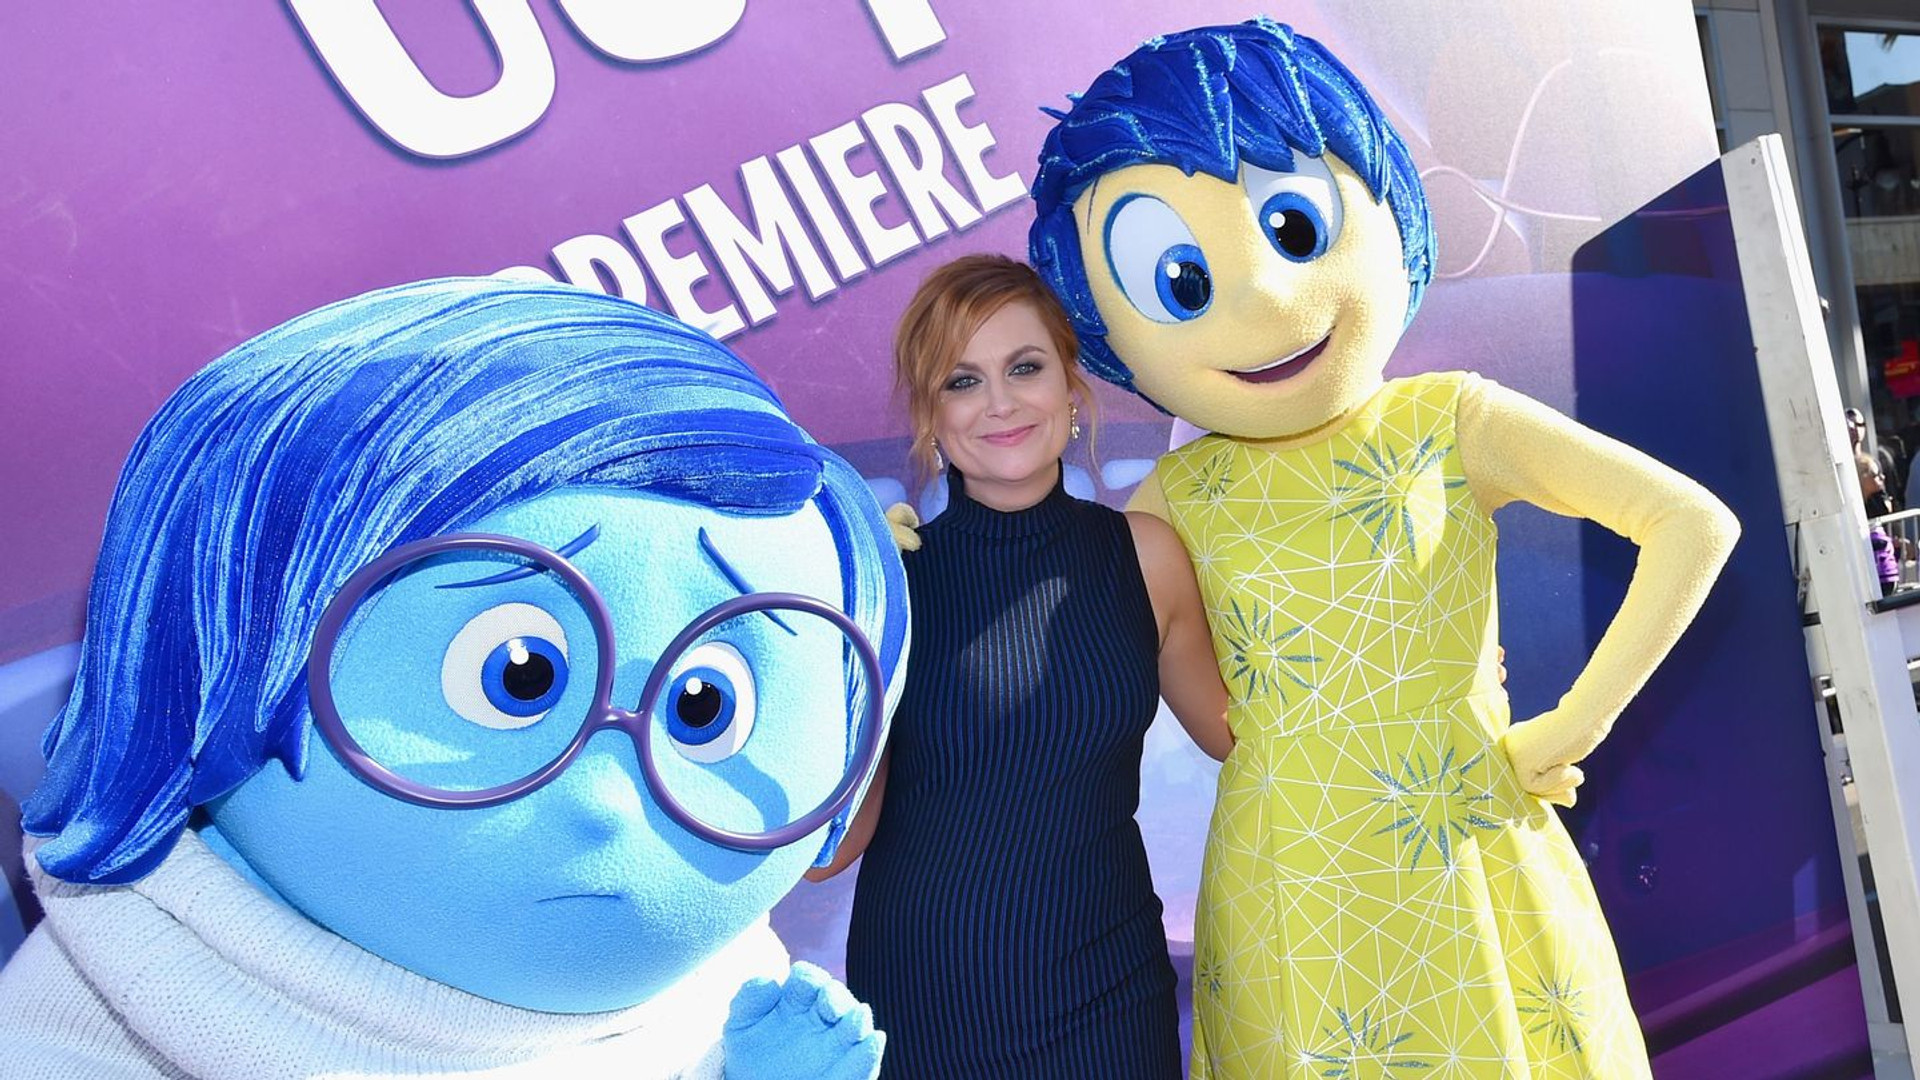 Amy Poehler at the premiere of Inside Out